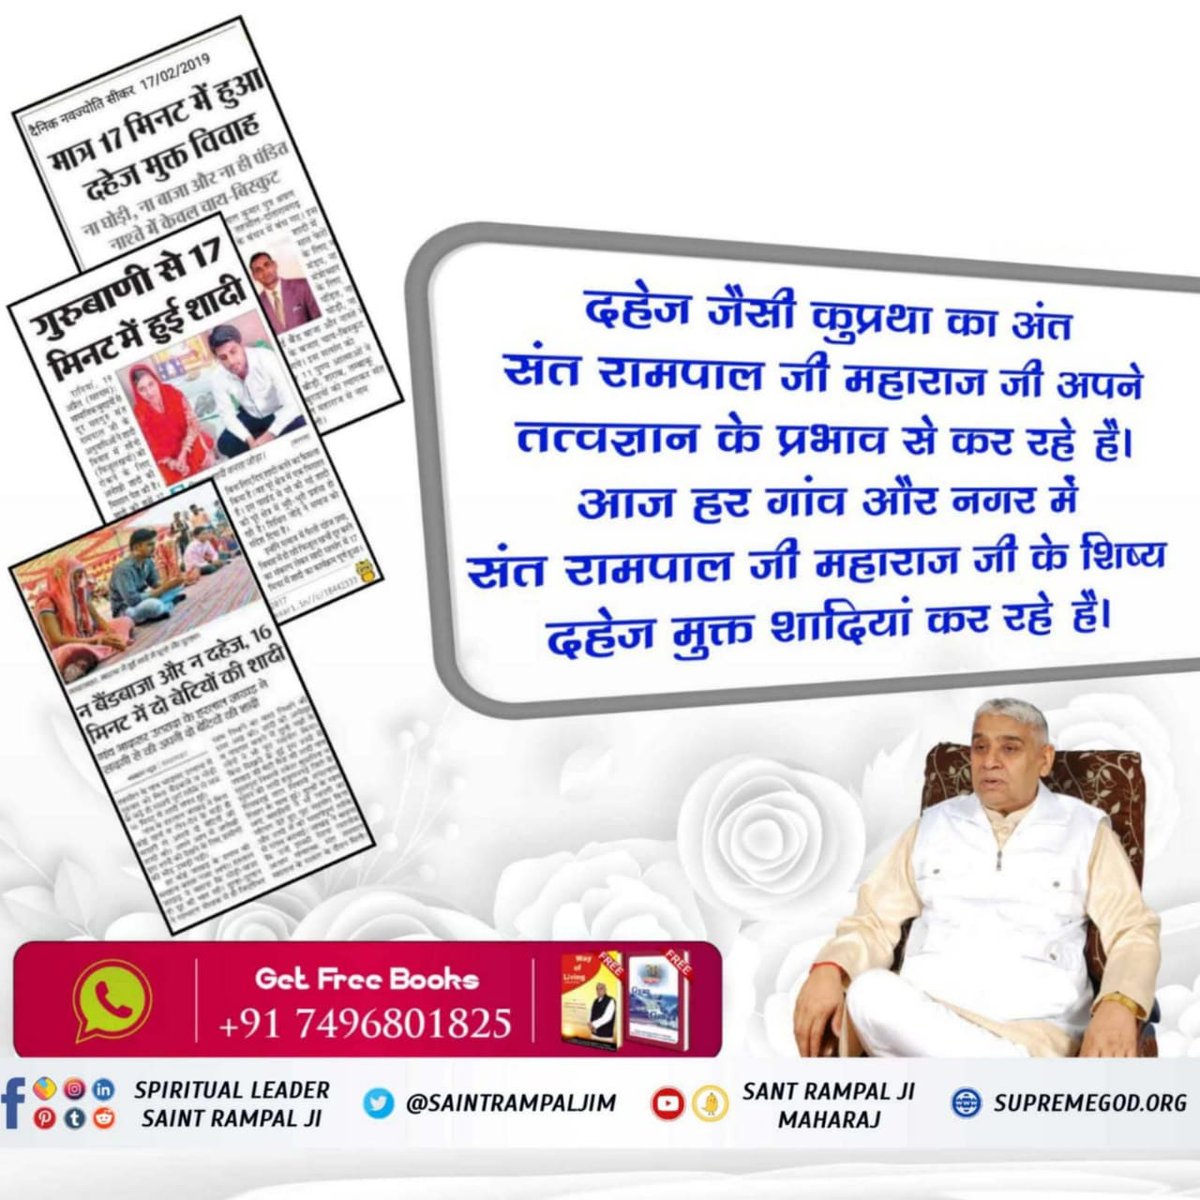 #अच्छे_हों_संस्कार_संसार_के बच्चों के
Saint Rampal Ji Maharaj is ending the evil practice of dowry through the influence of his philosophy.

Today, in every village and town, the disciples of Saint Rampal Ji are conducting dowry-free marriages.

Social Reformer Sant RampalJi